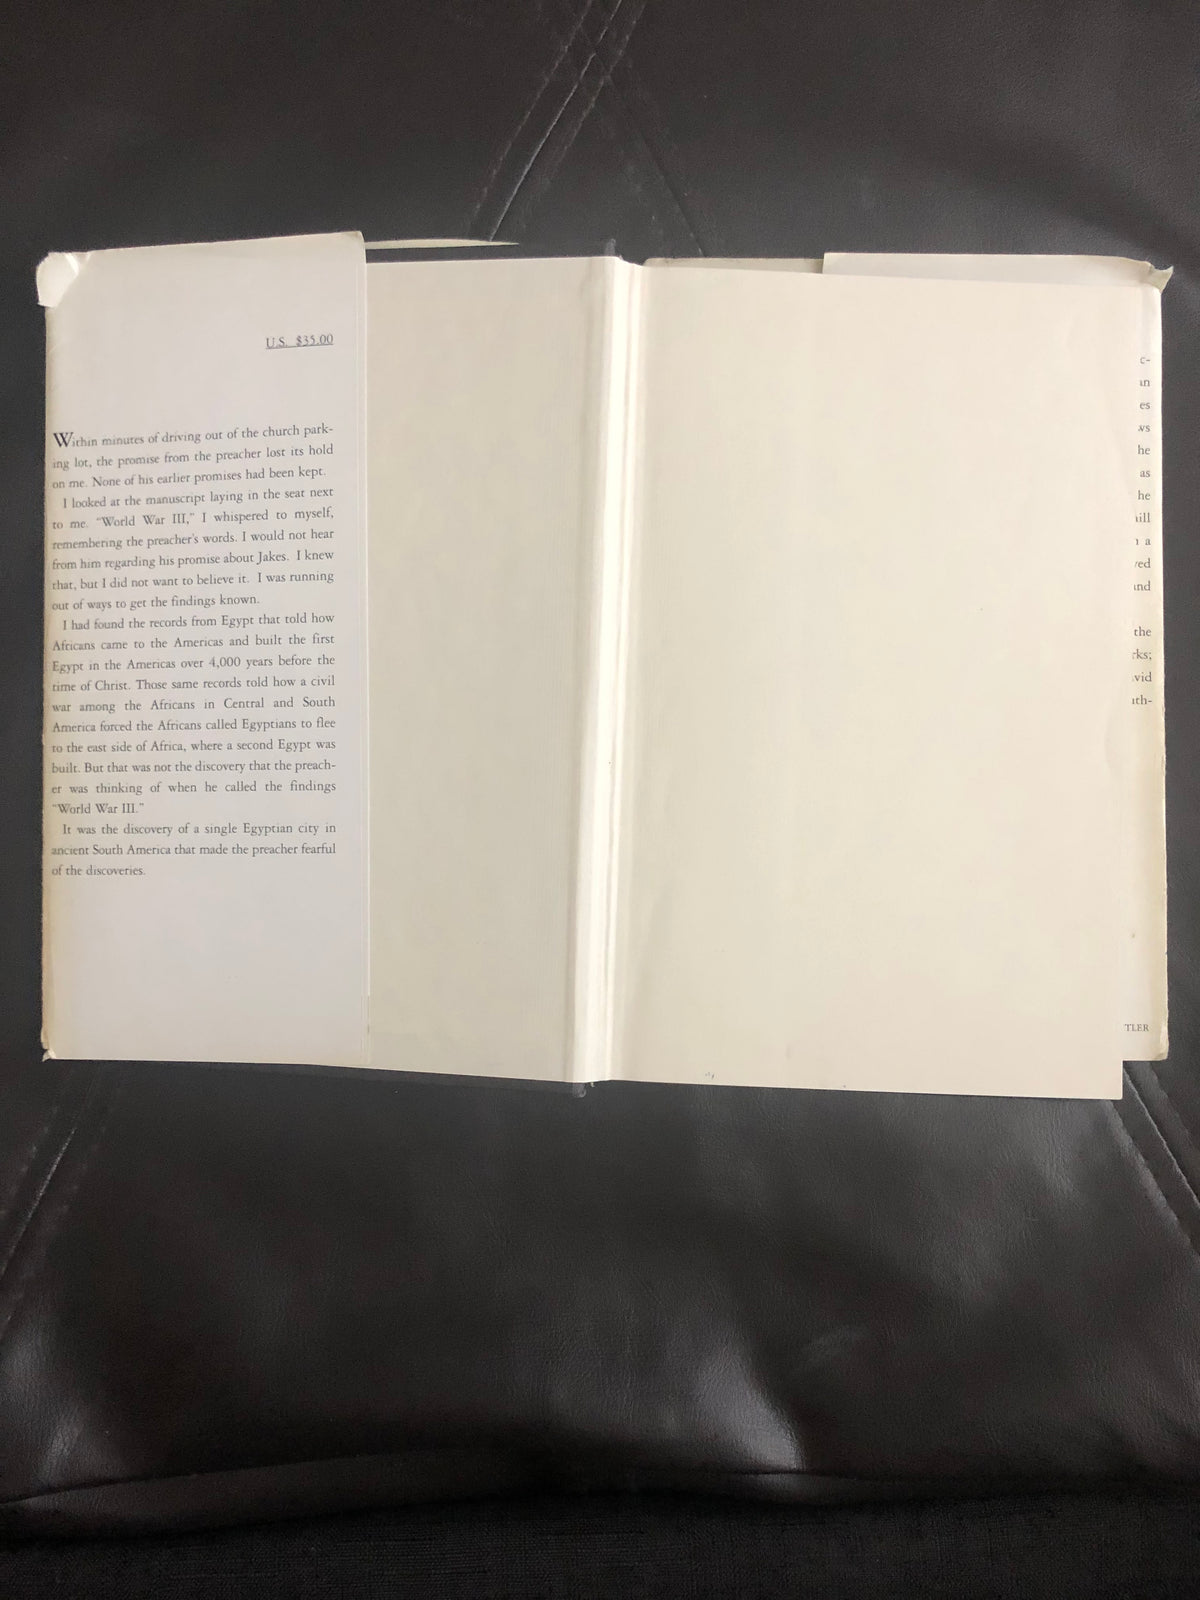 First Edition When Rocks Cry Out by Horace Butler SIGNED and NUMBERED. HARDCOVER.